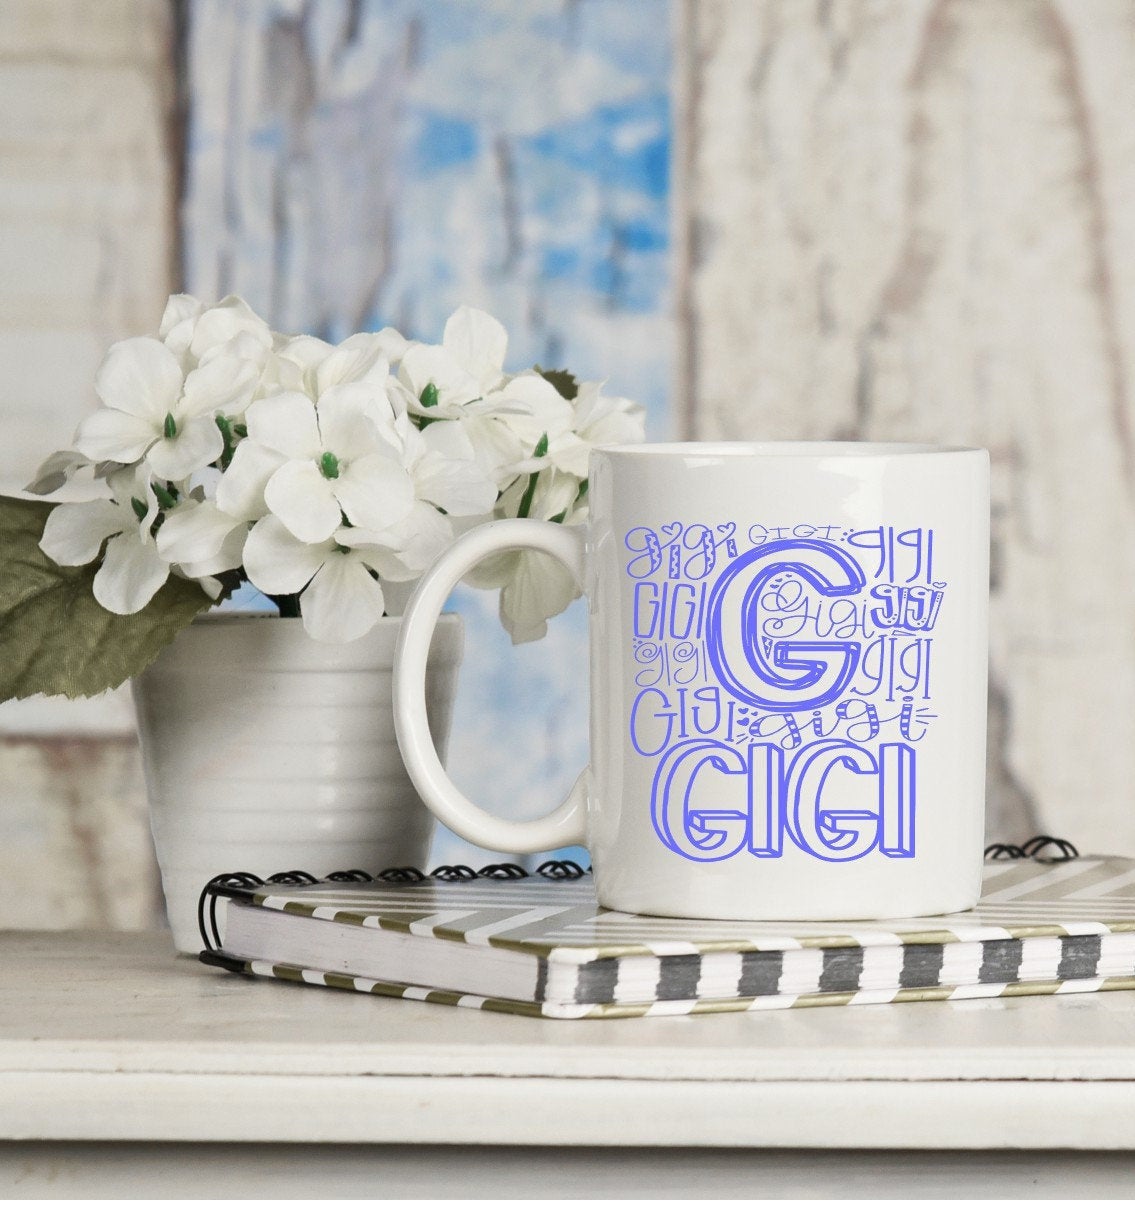 Mothers day cup, gigi cup, mom mug, mothers day gift, gift for grandma, coffee mug, typography, best gigi ever, personalized coffee cup